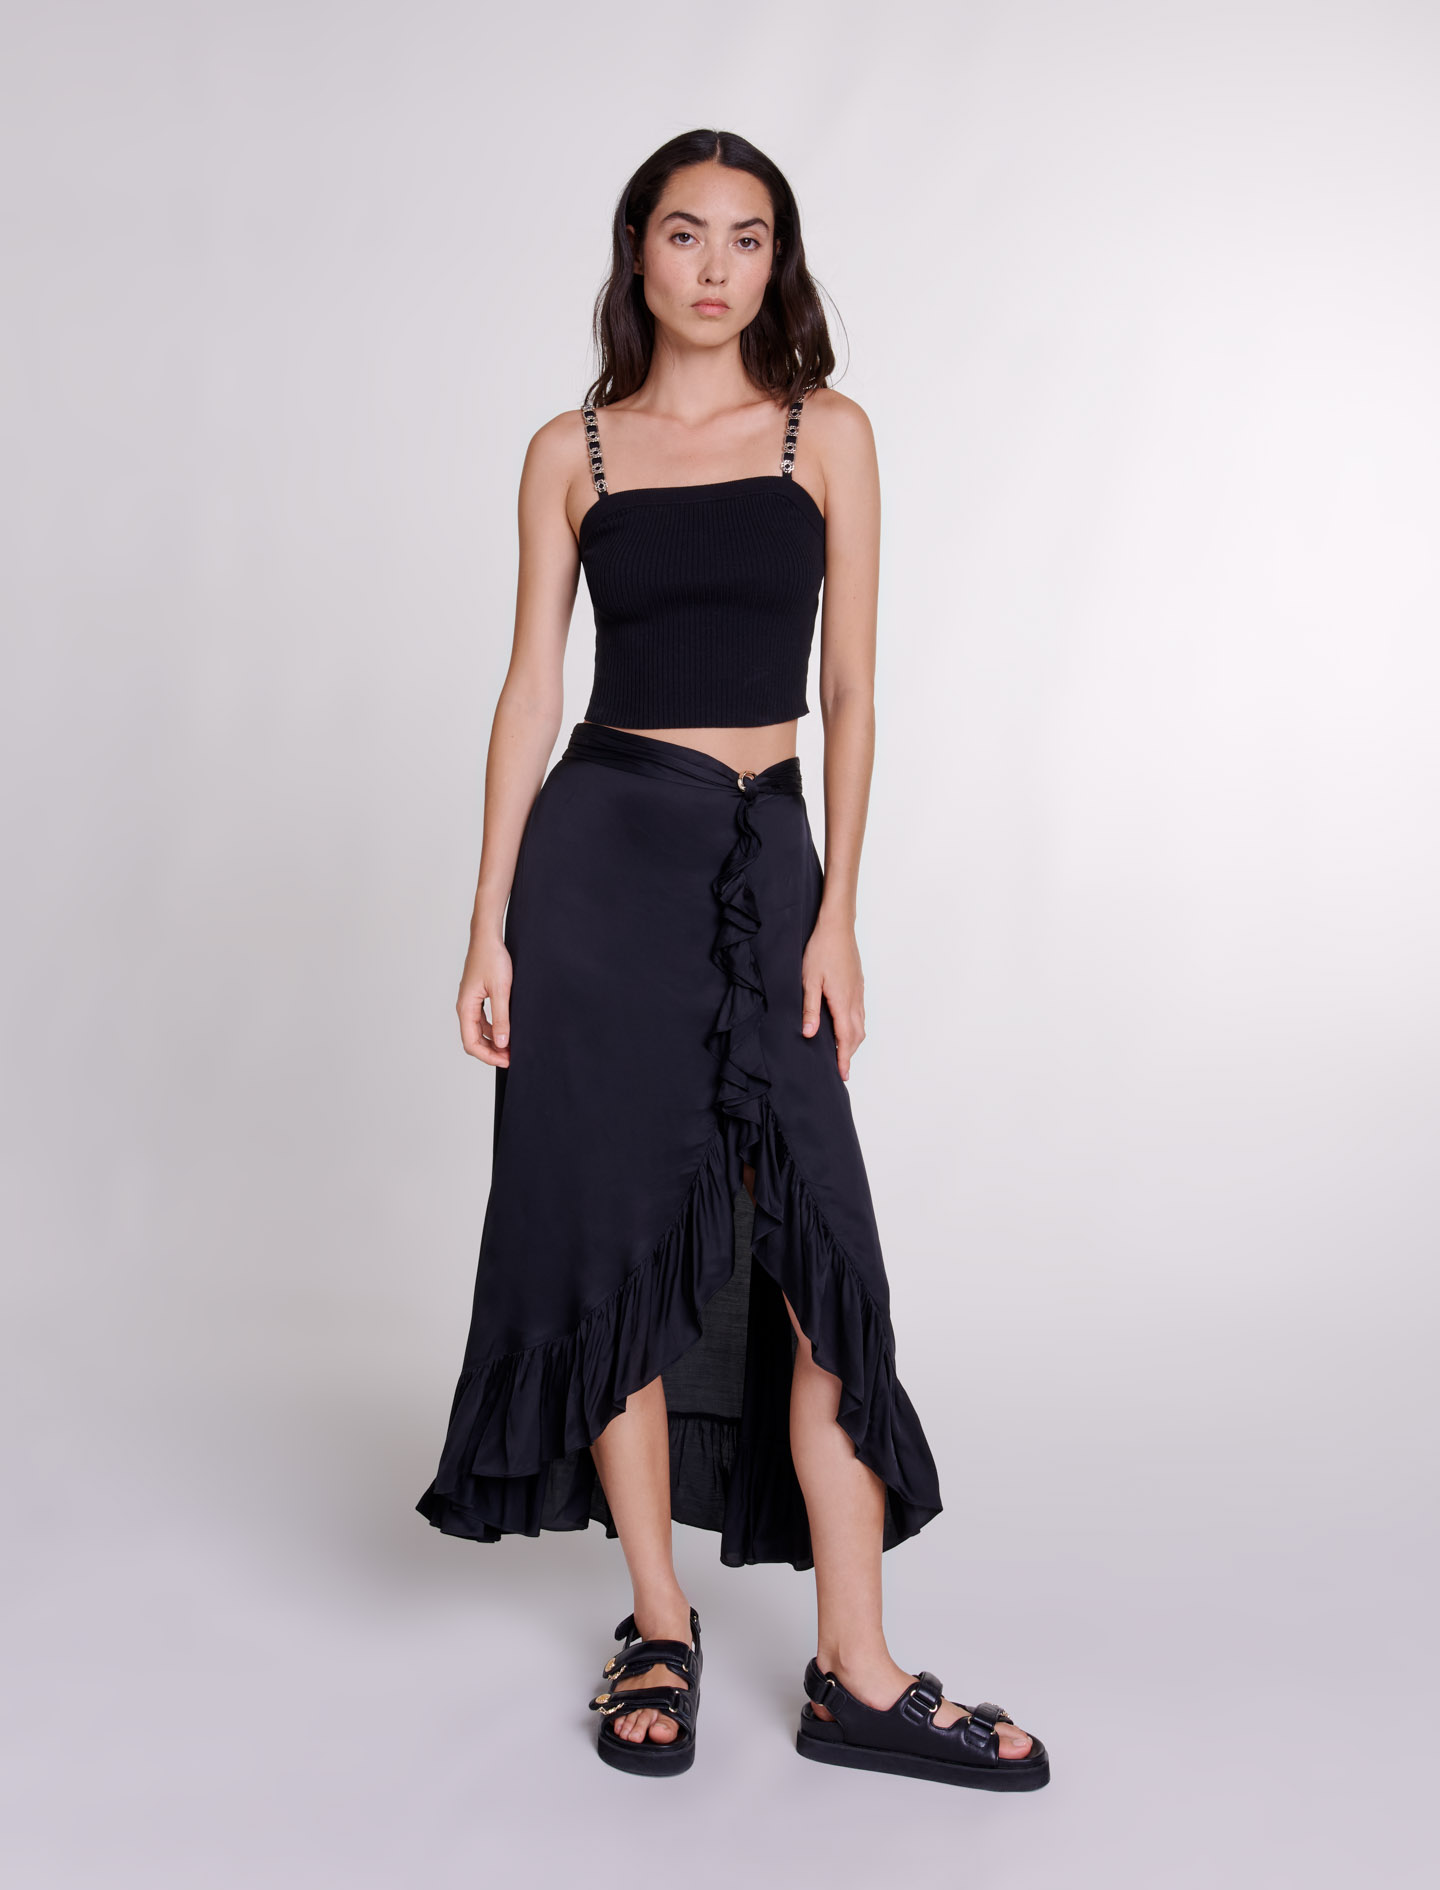 Maje Woman's viscose Long satin-effect ruffled skirt for Spring/Summer, in color Black / Black